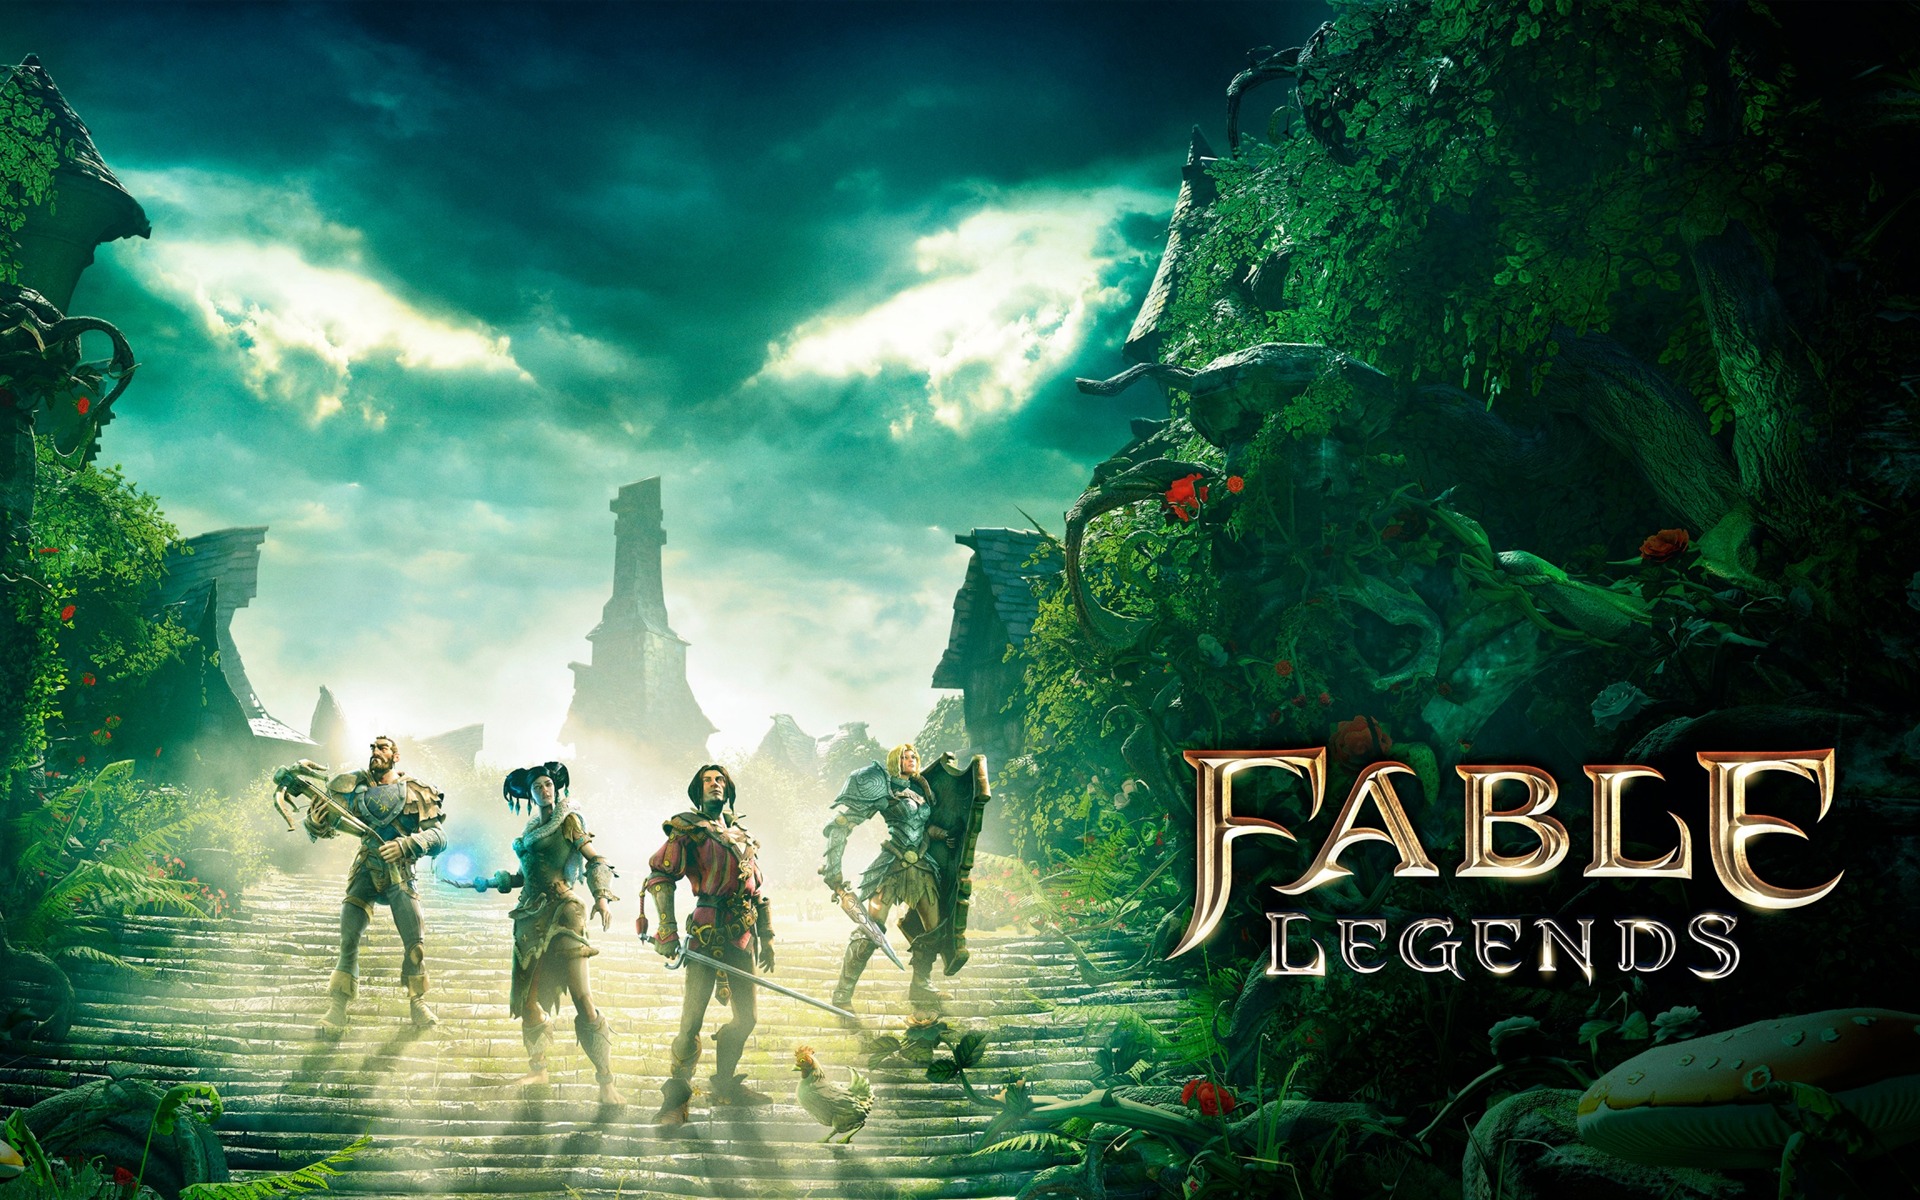 Fable Wallpapers